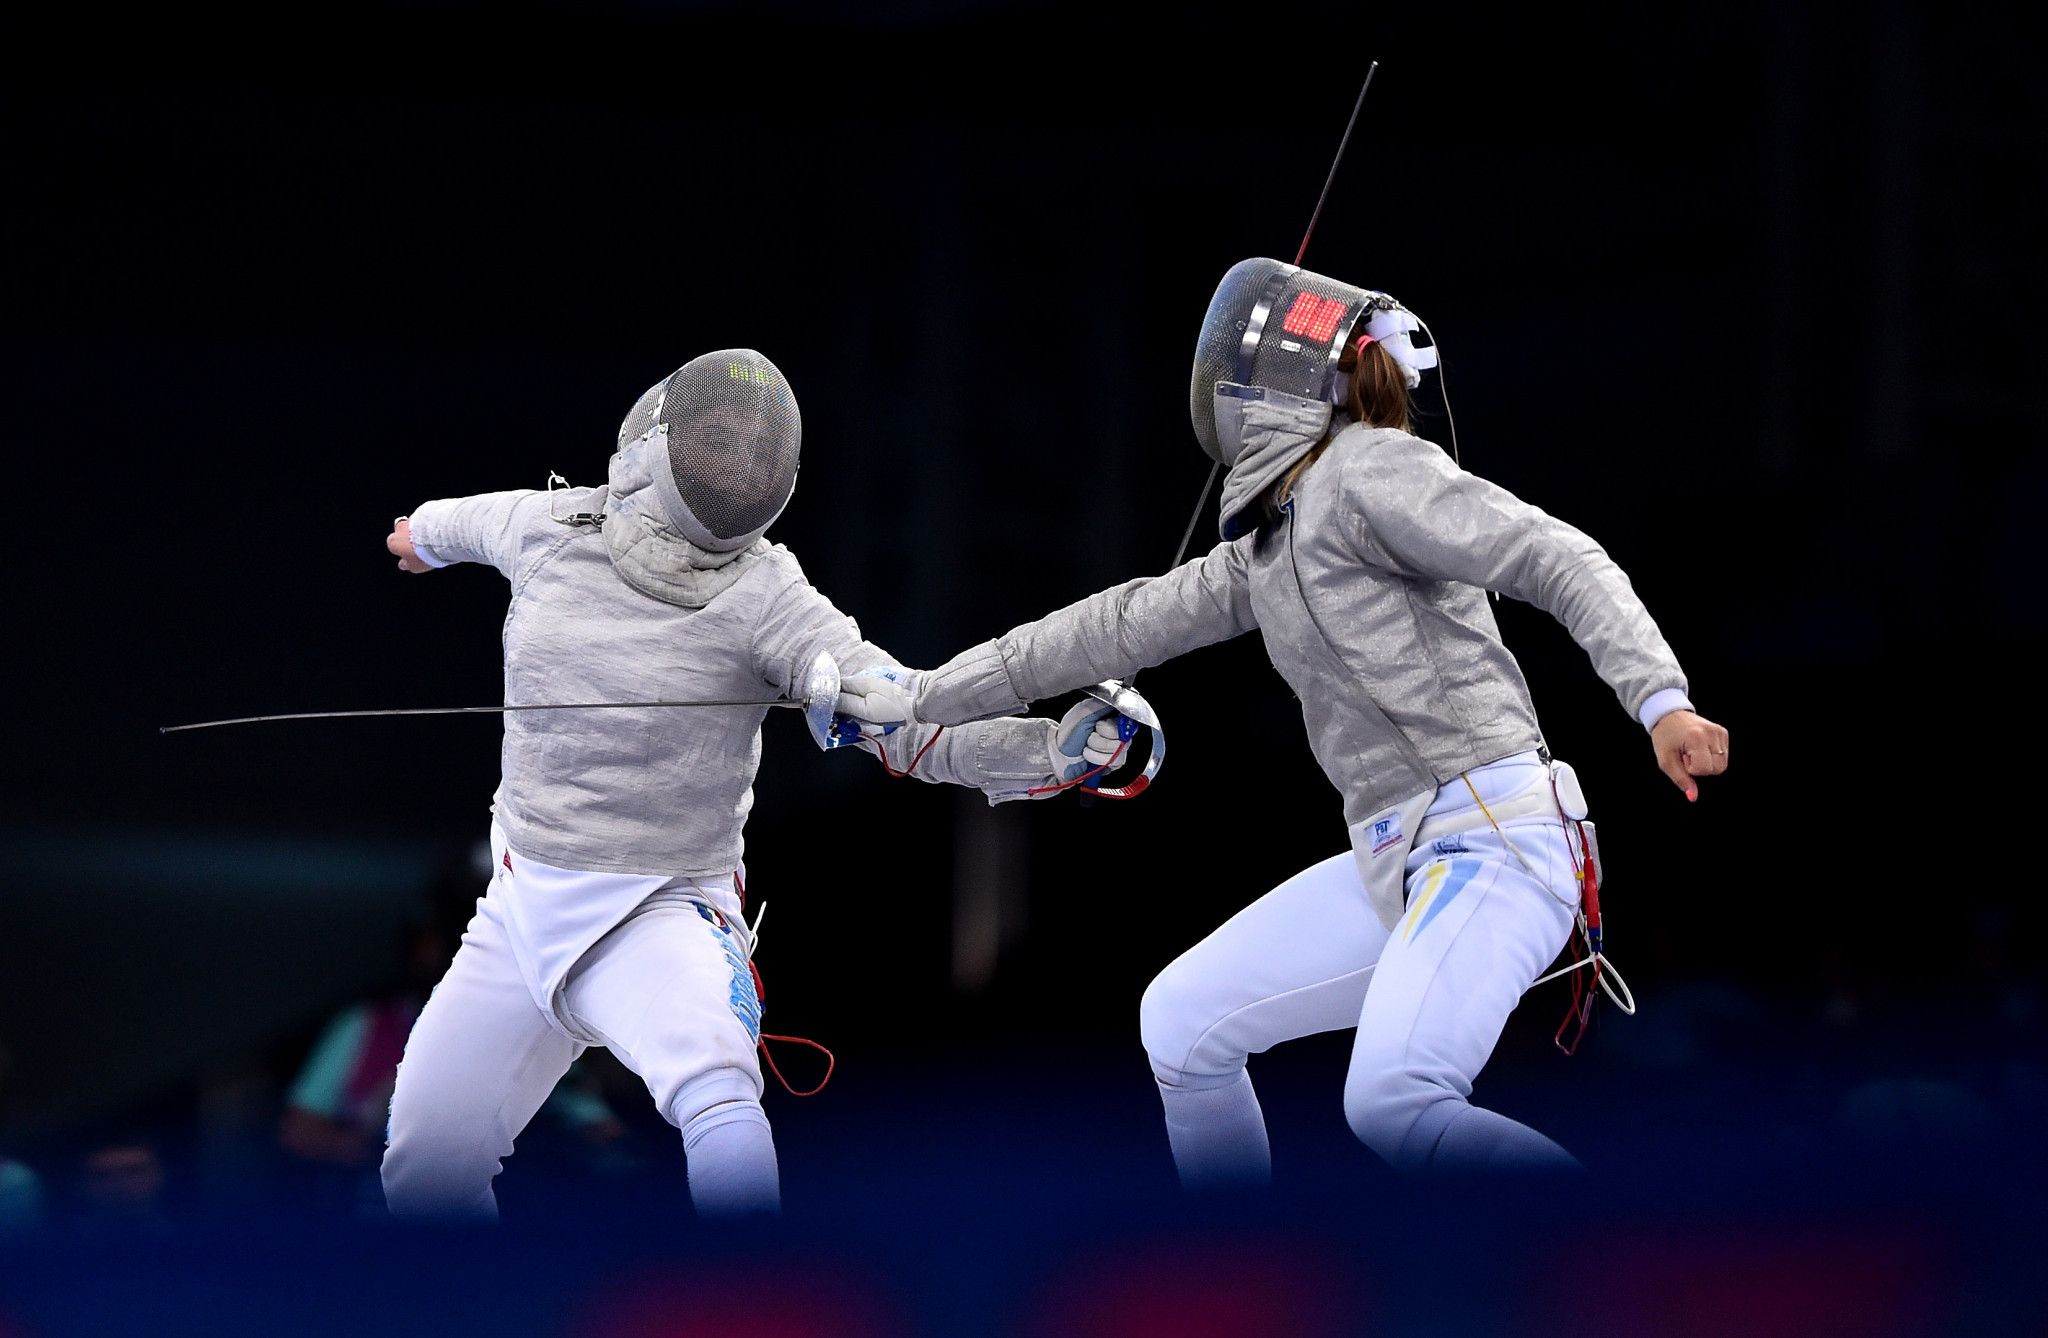 Martina Criscio sealed the individual honours at the women's Sabre World Cup in Baltimore ©Getty Images